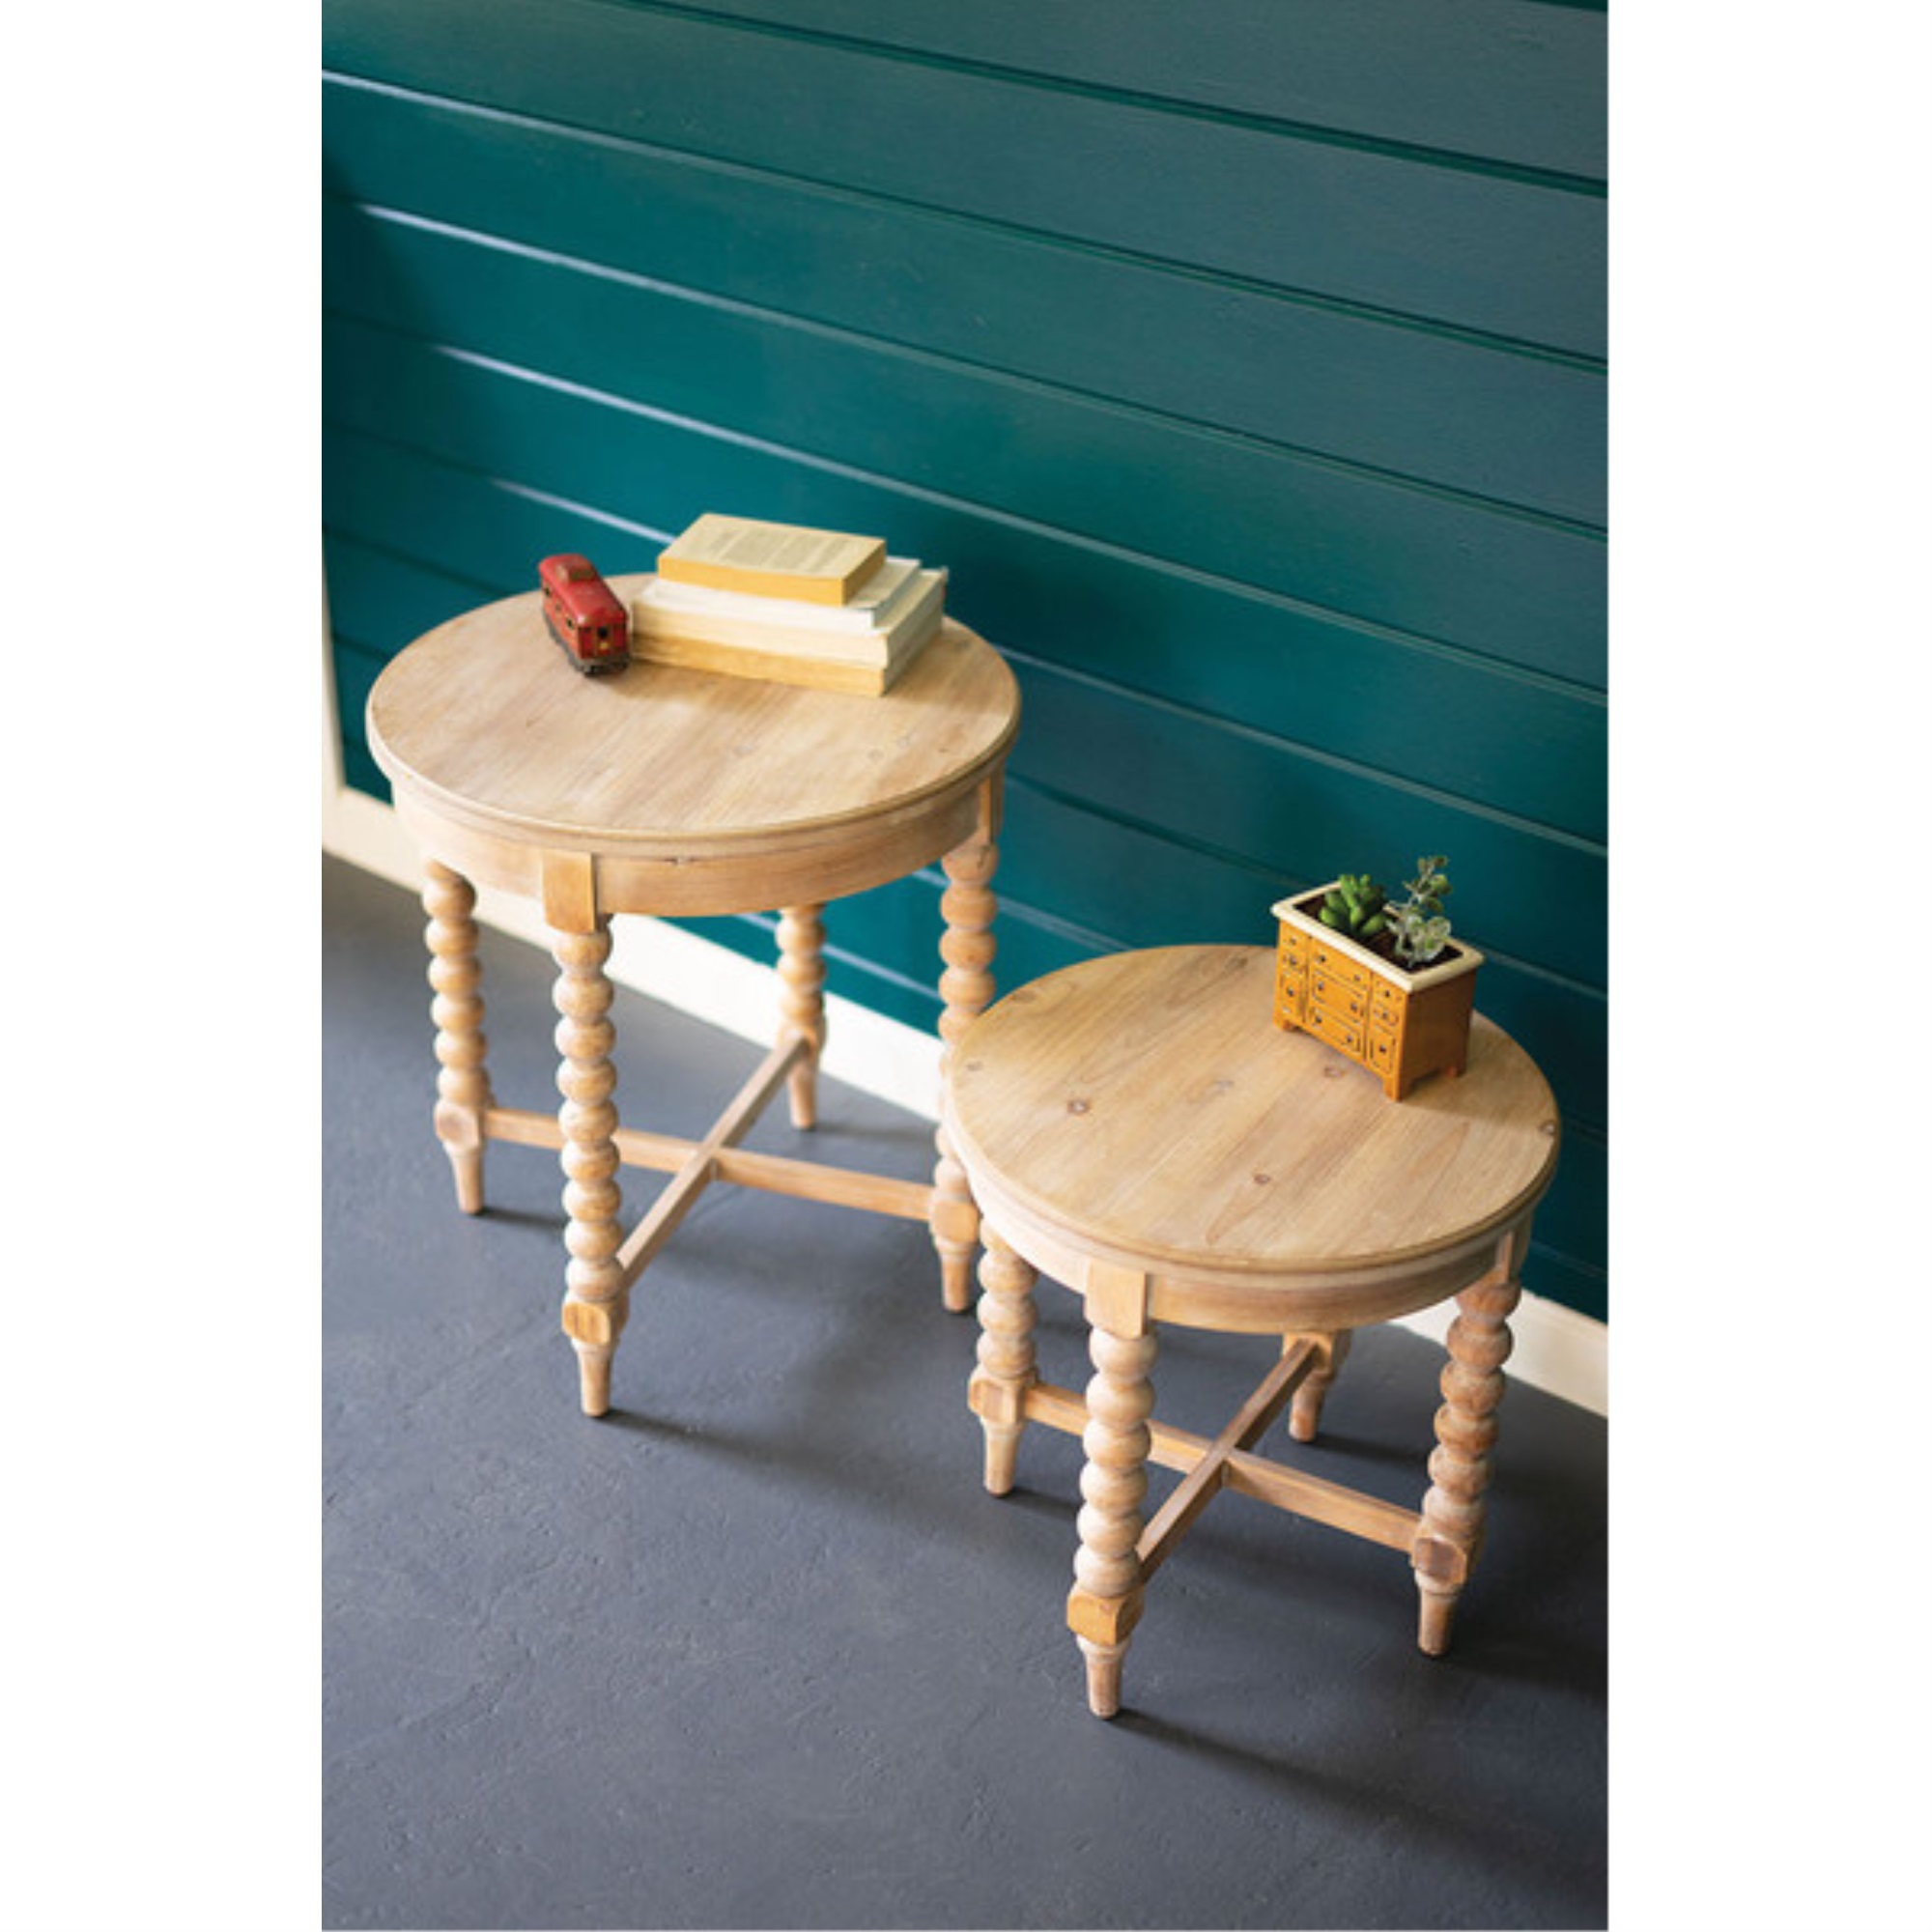 Set Of 2 Round Wooden Side Tables With Turned Legs Large 22"D X 23.5"T